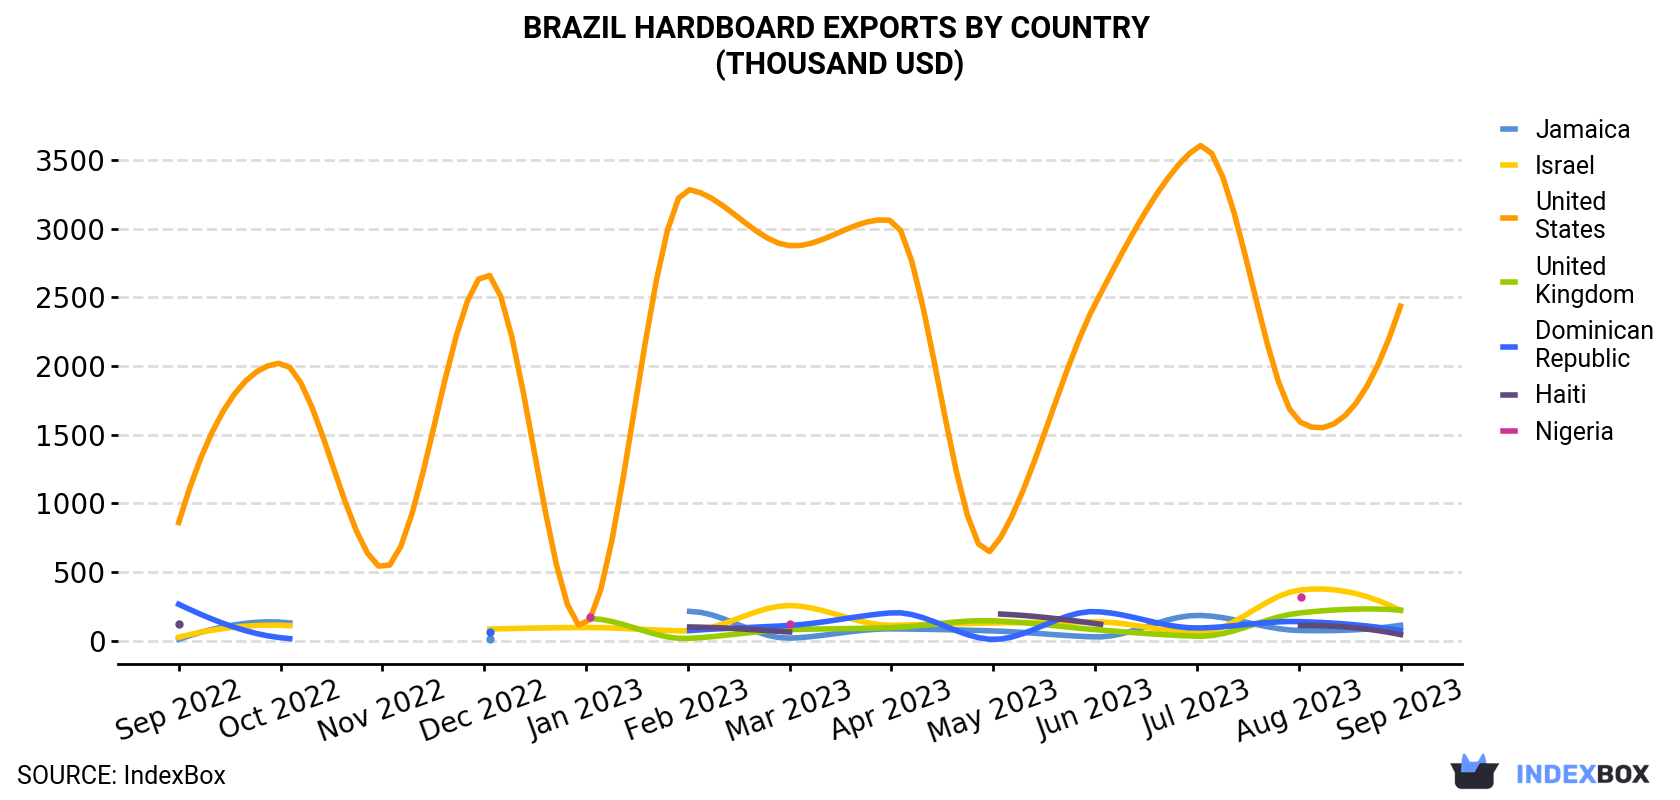 Brazil Hardboard Exports By Country (Thousand USD)